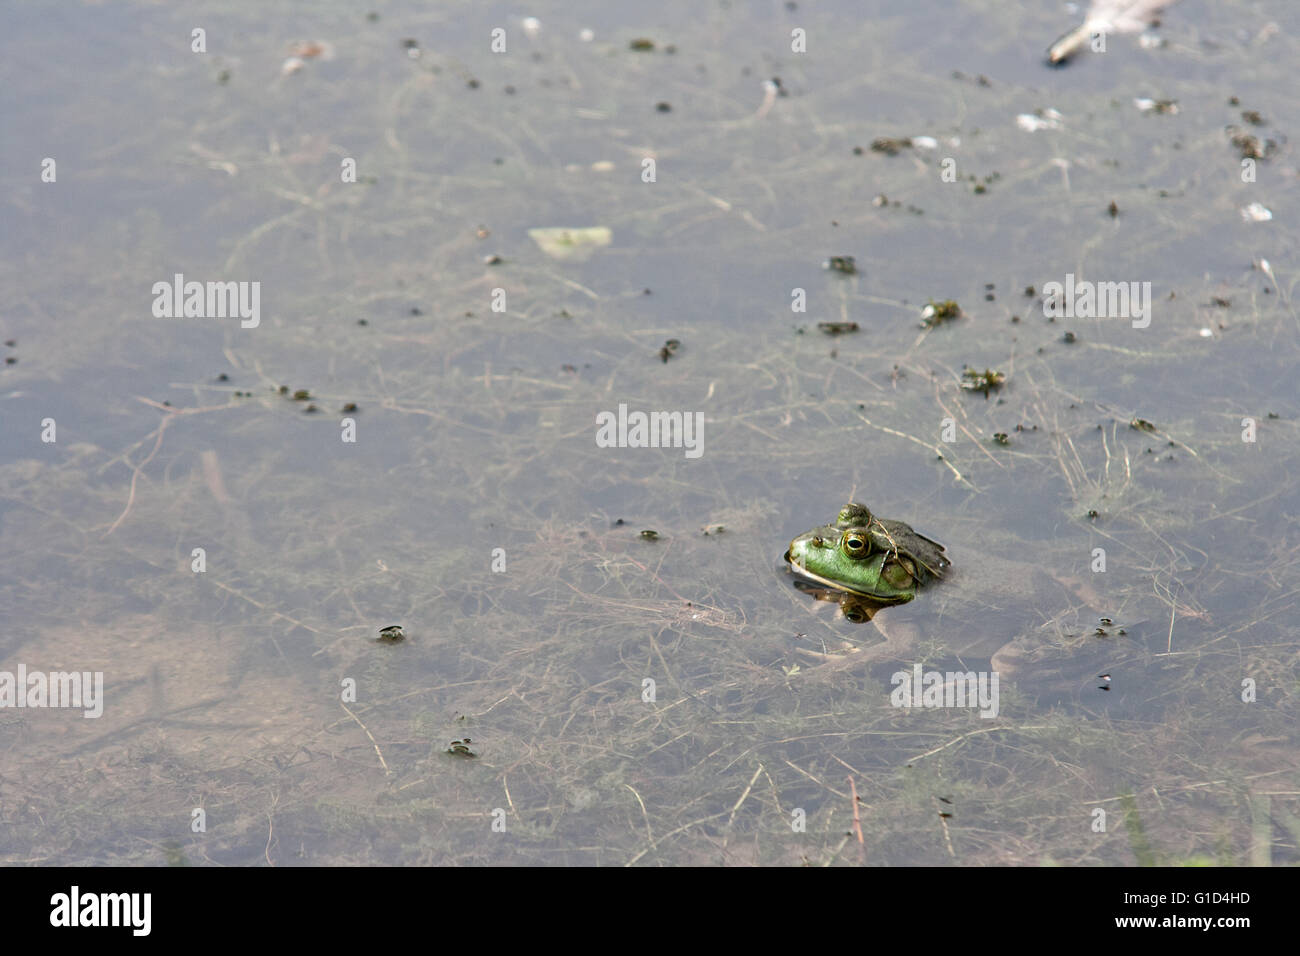 American bullfrog in a pond. Stock Photo